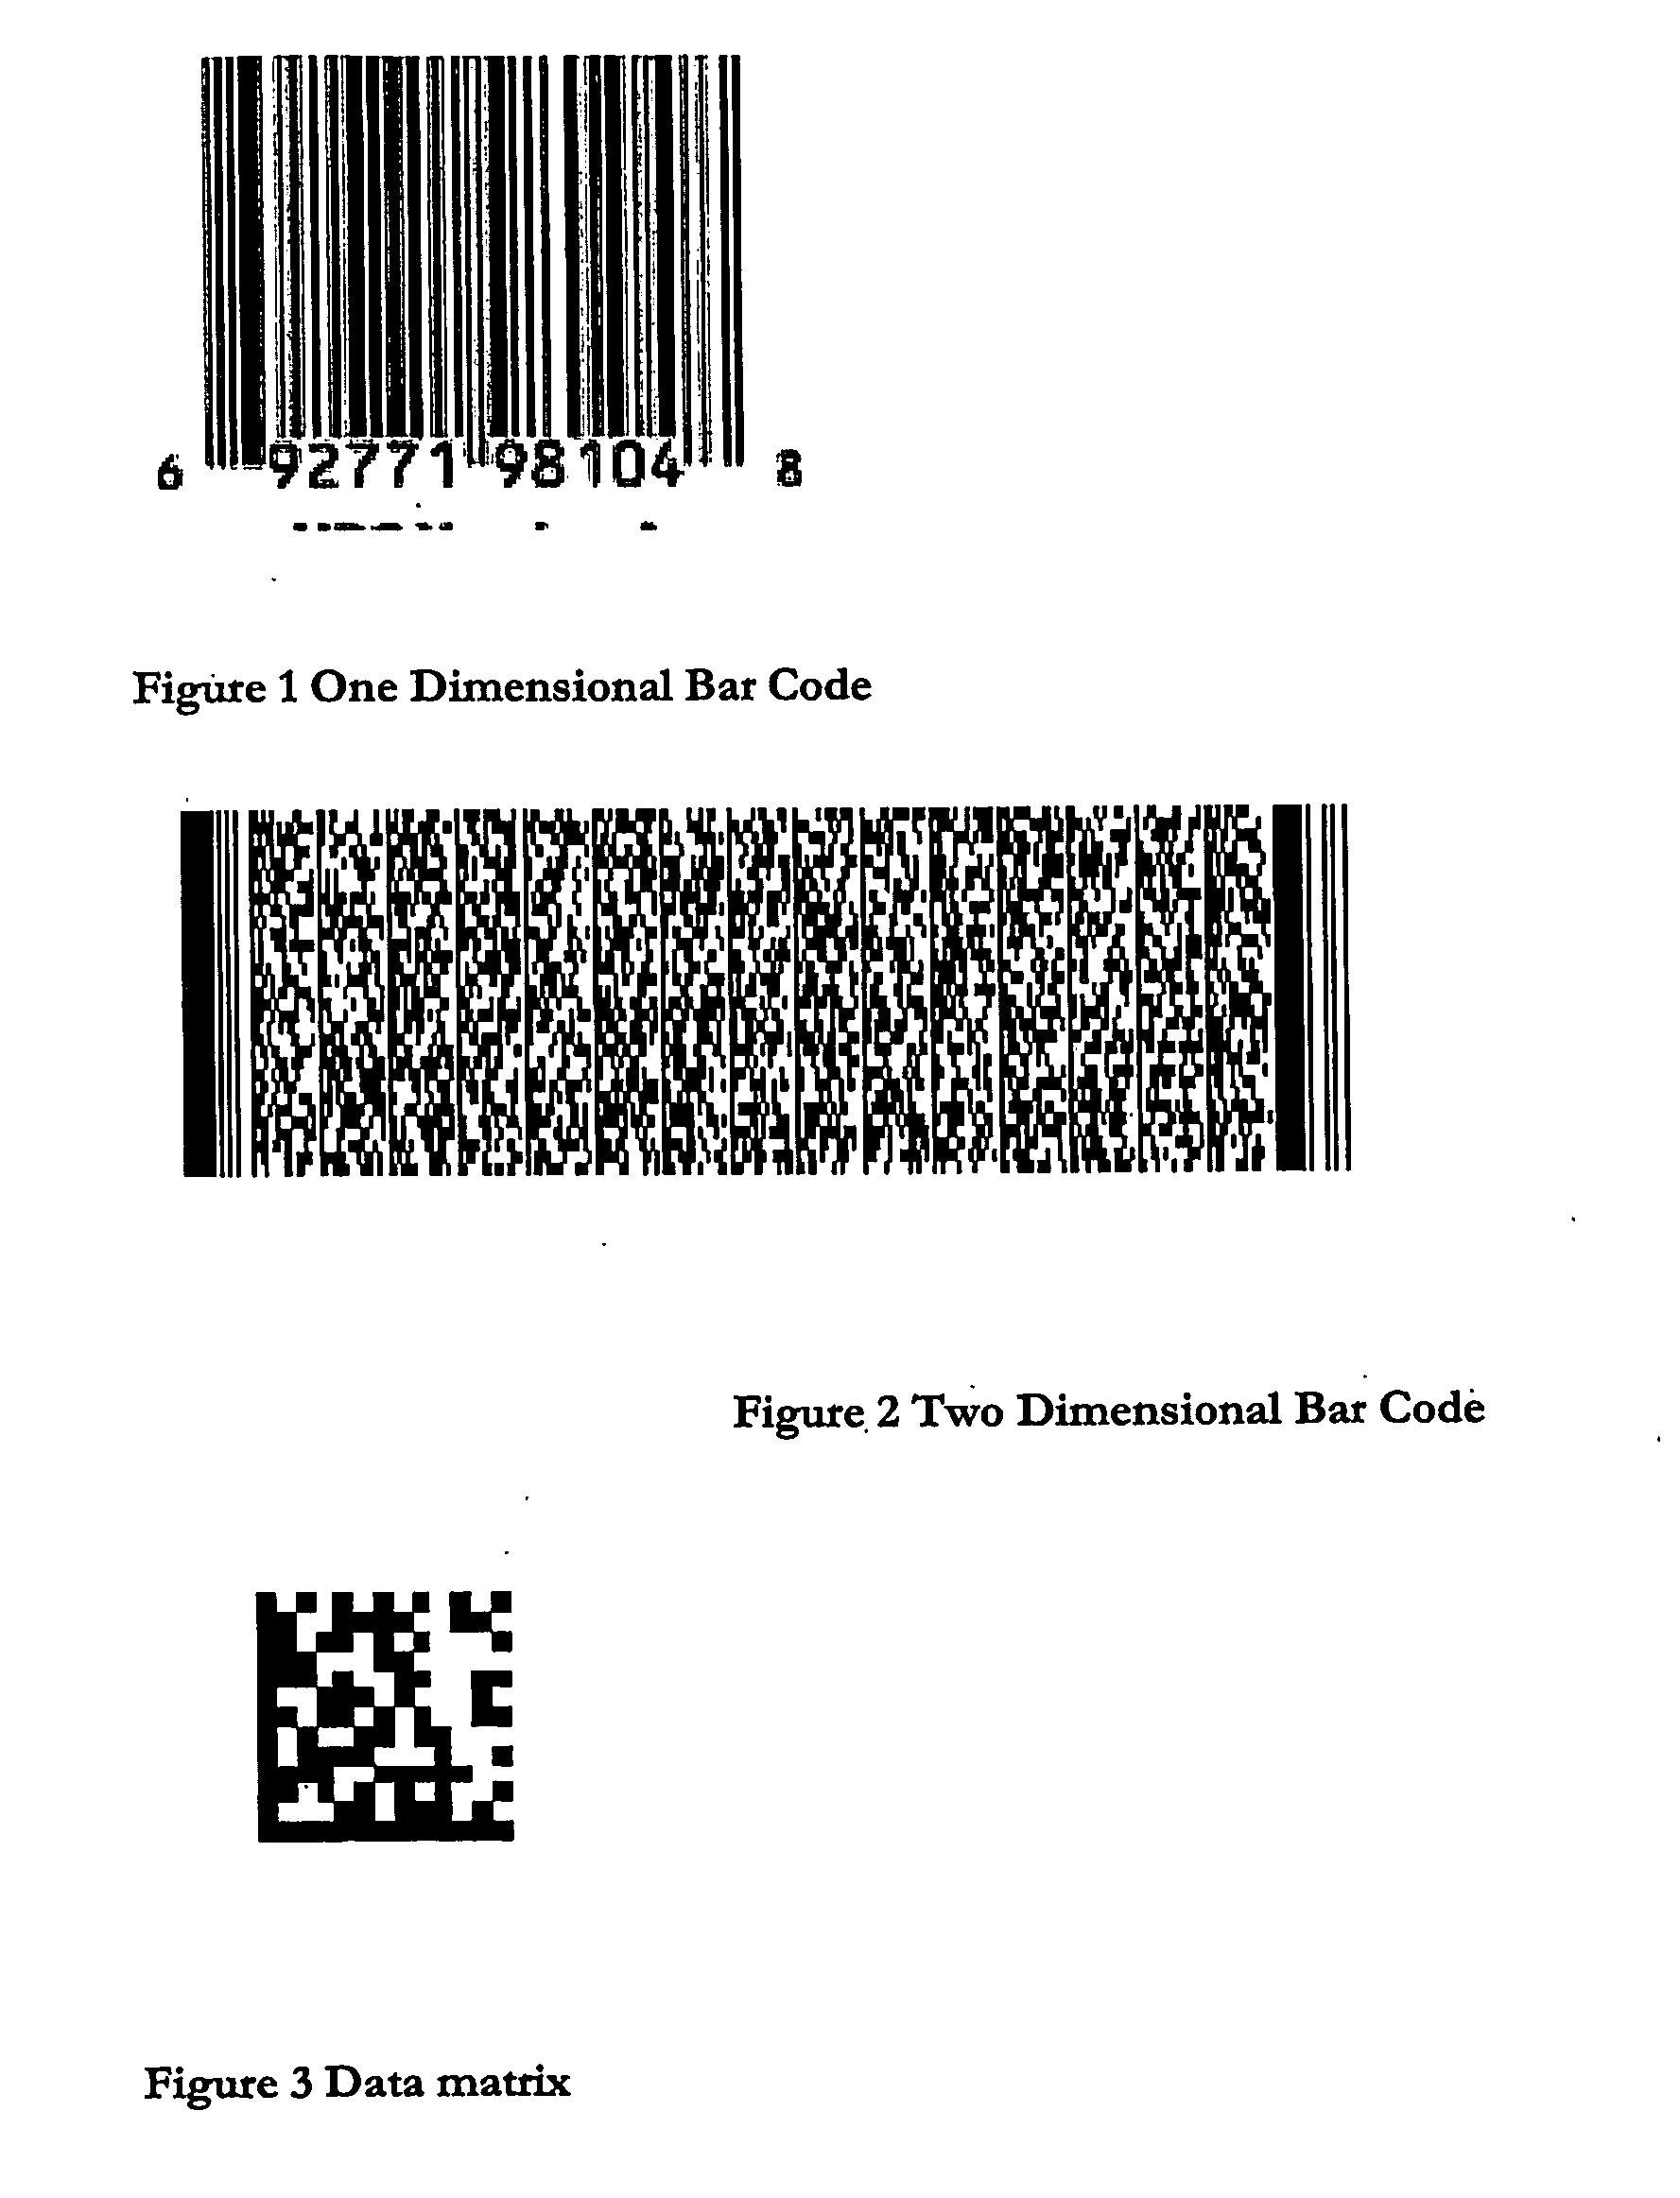 Method of preparing a document so that it can be authenticated